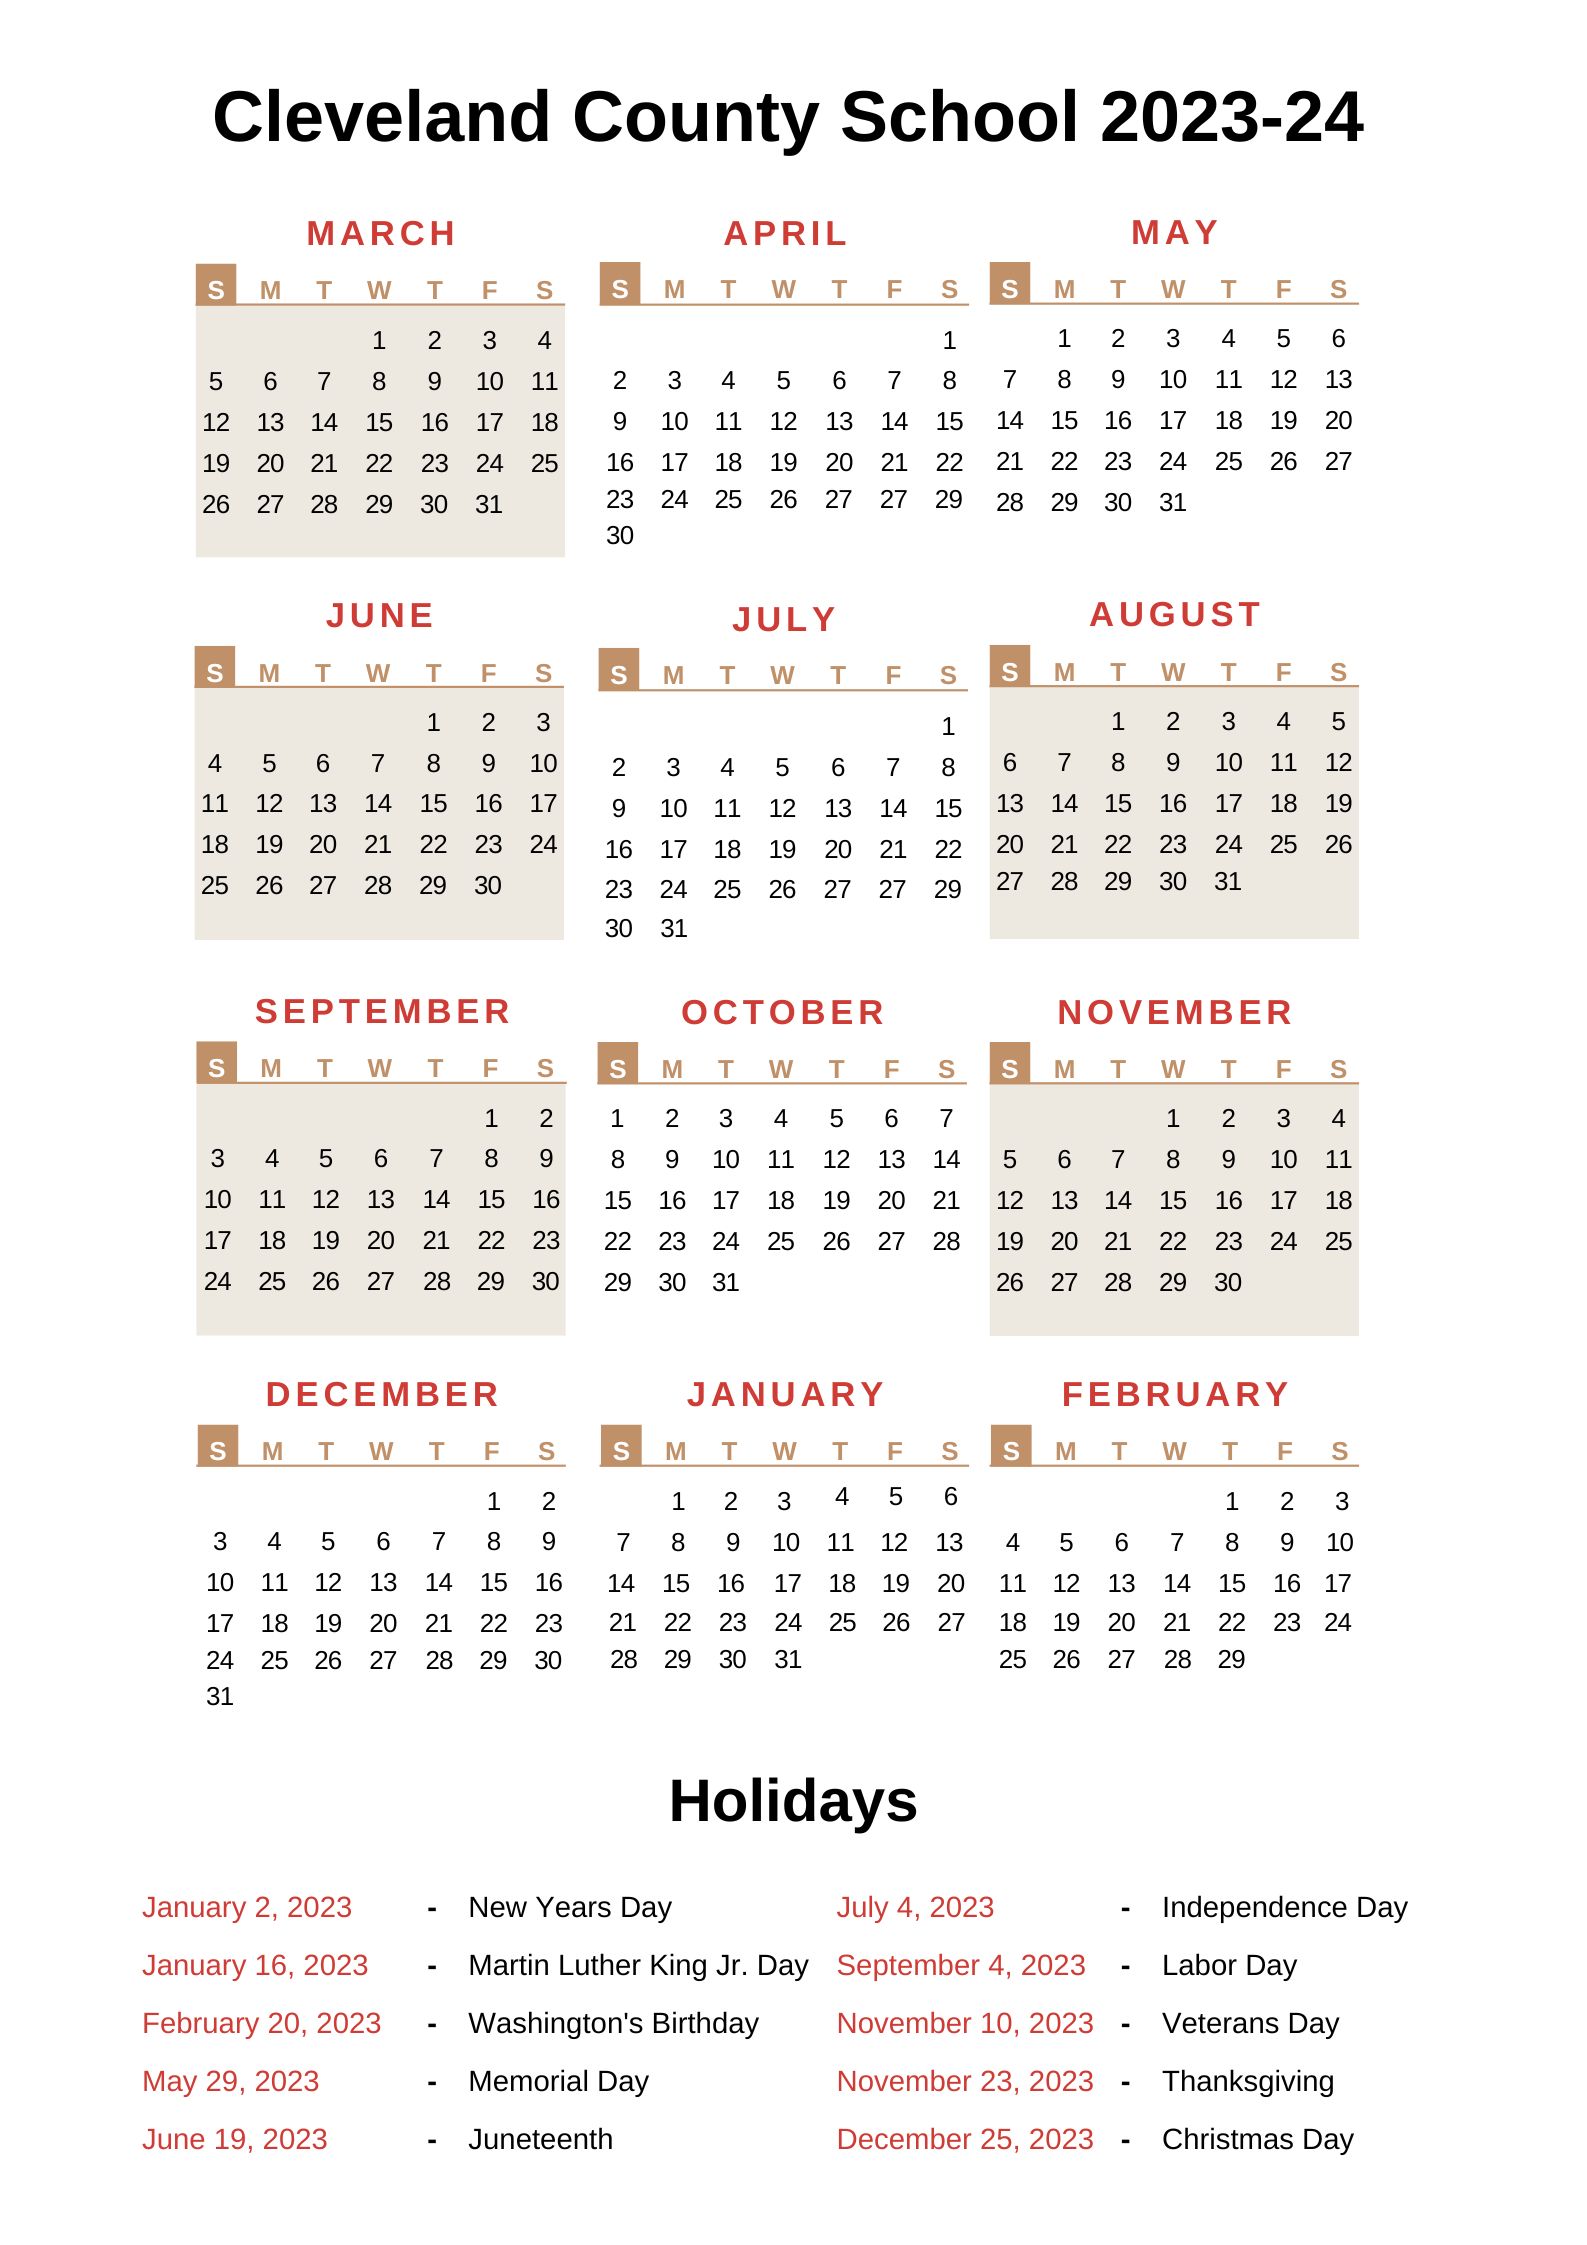 cleveland-county-schools-calendar-2023-24-with-holidays